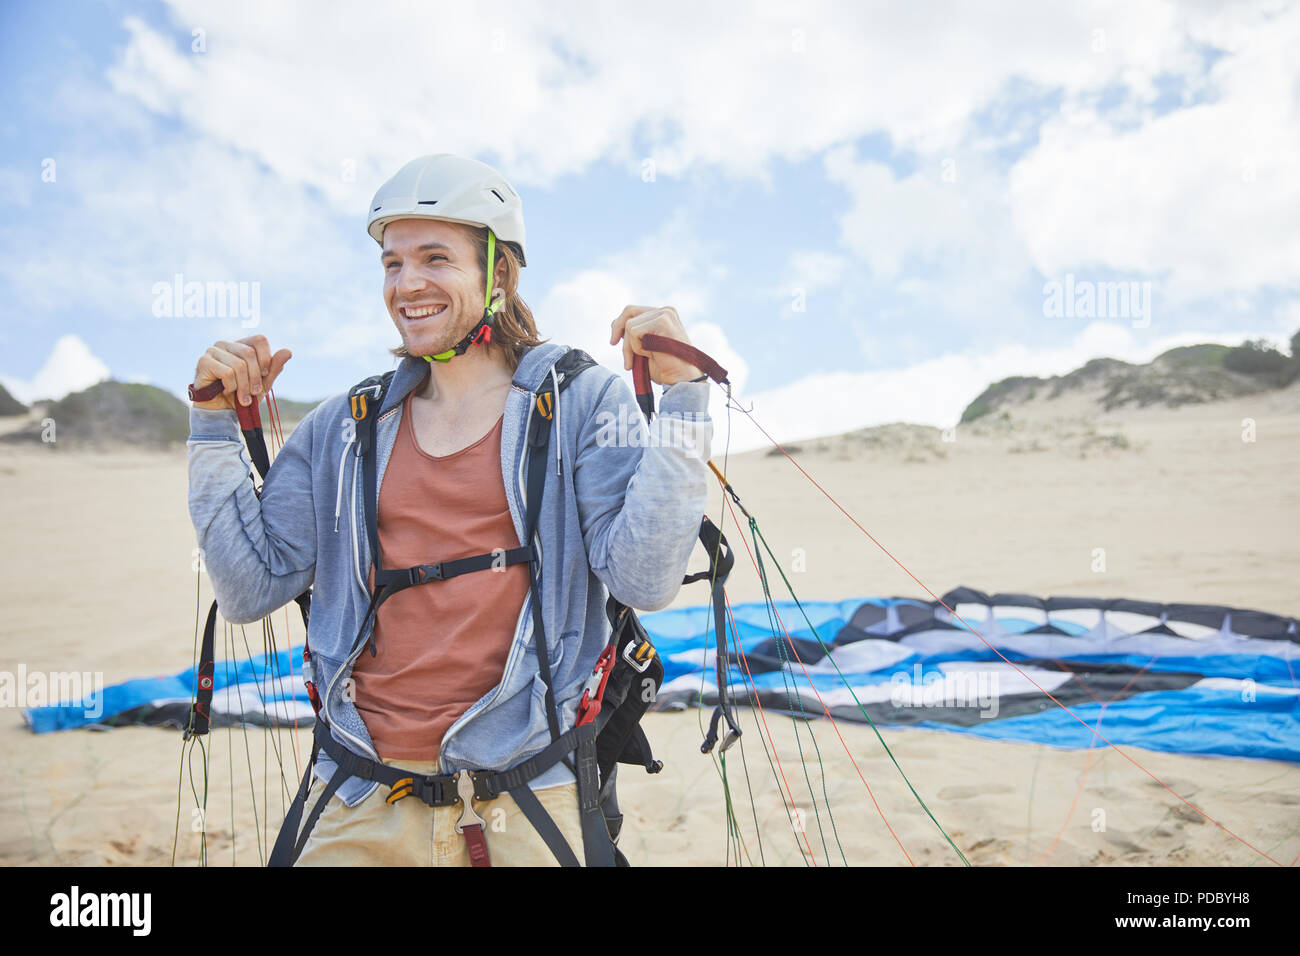 Smiling, confident paraglider with parachute on beach Stock Photo